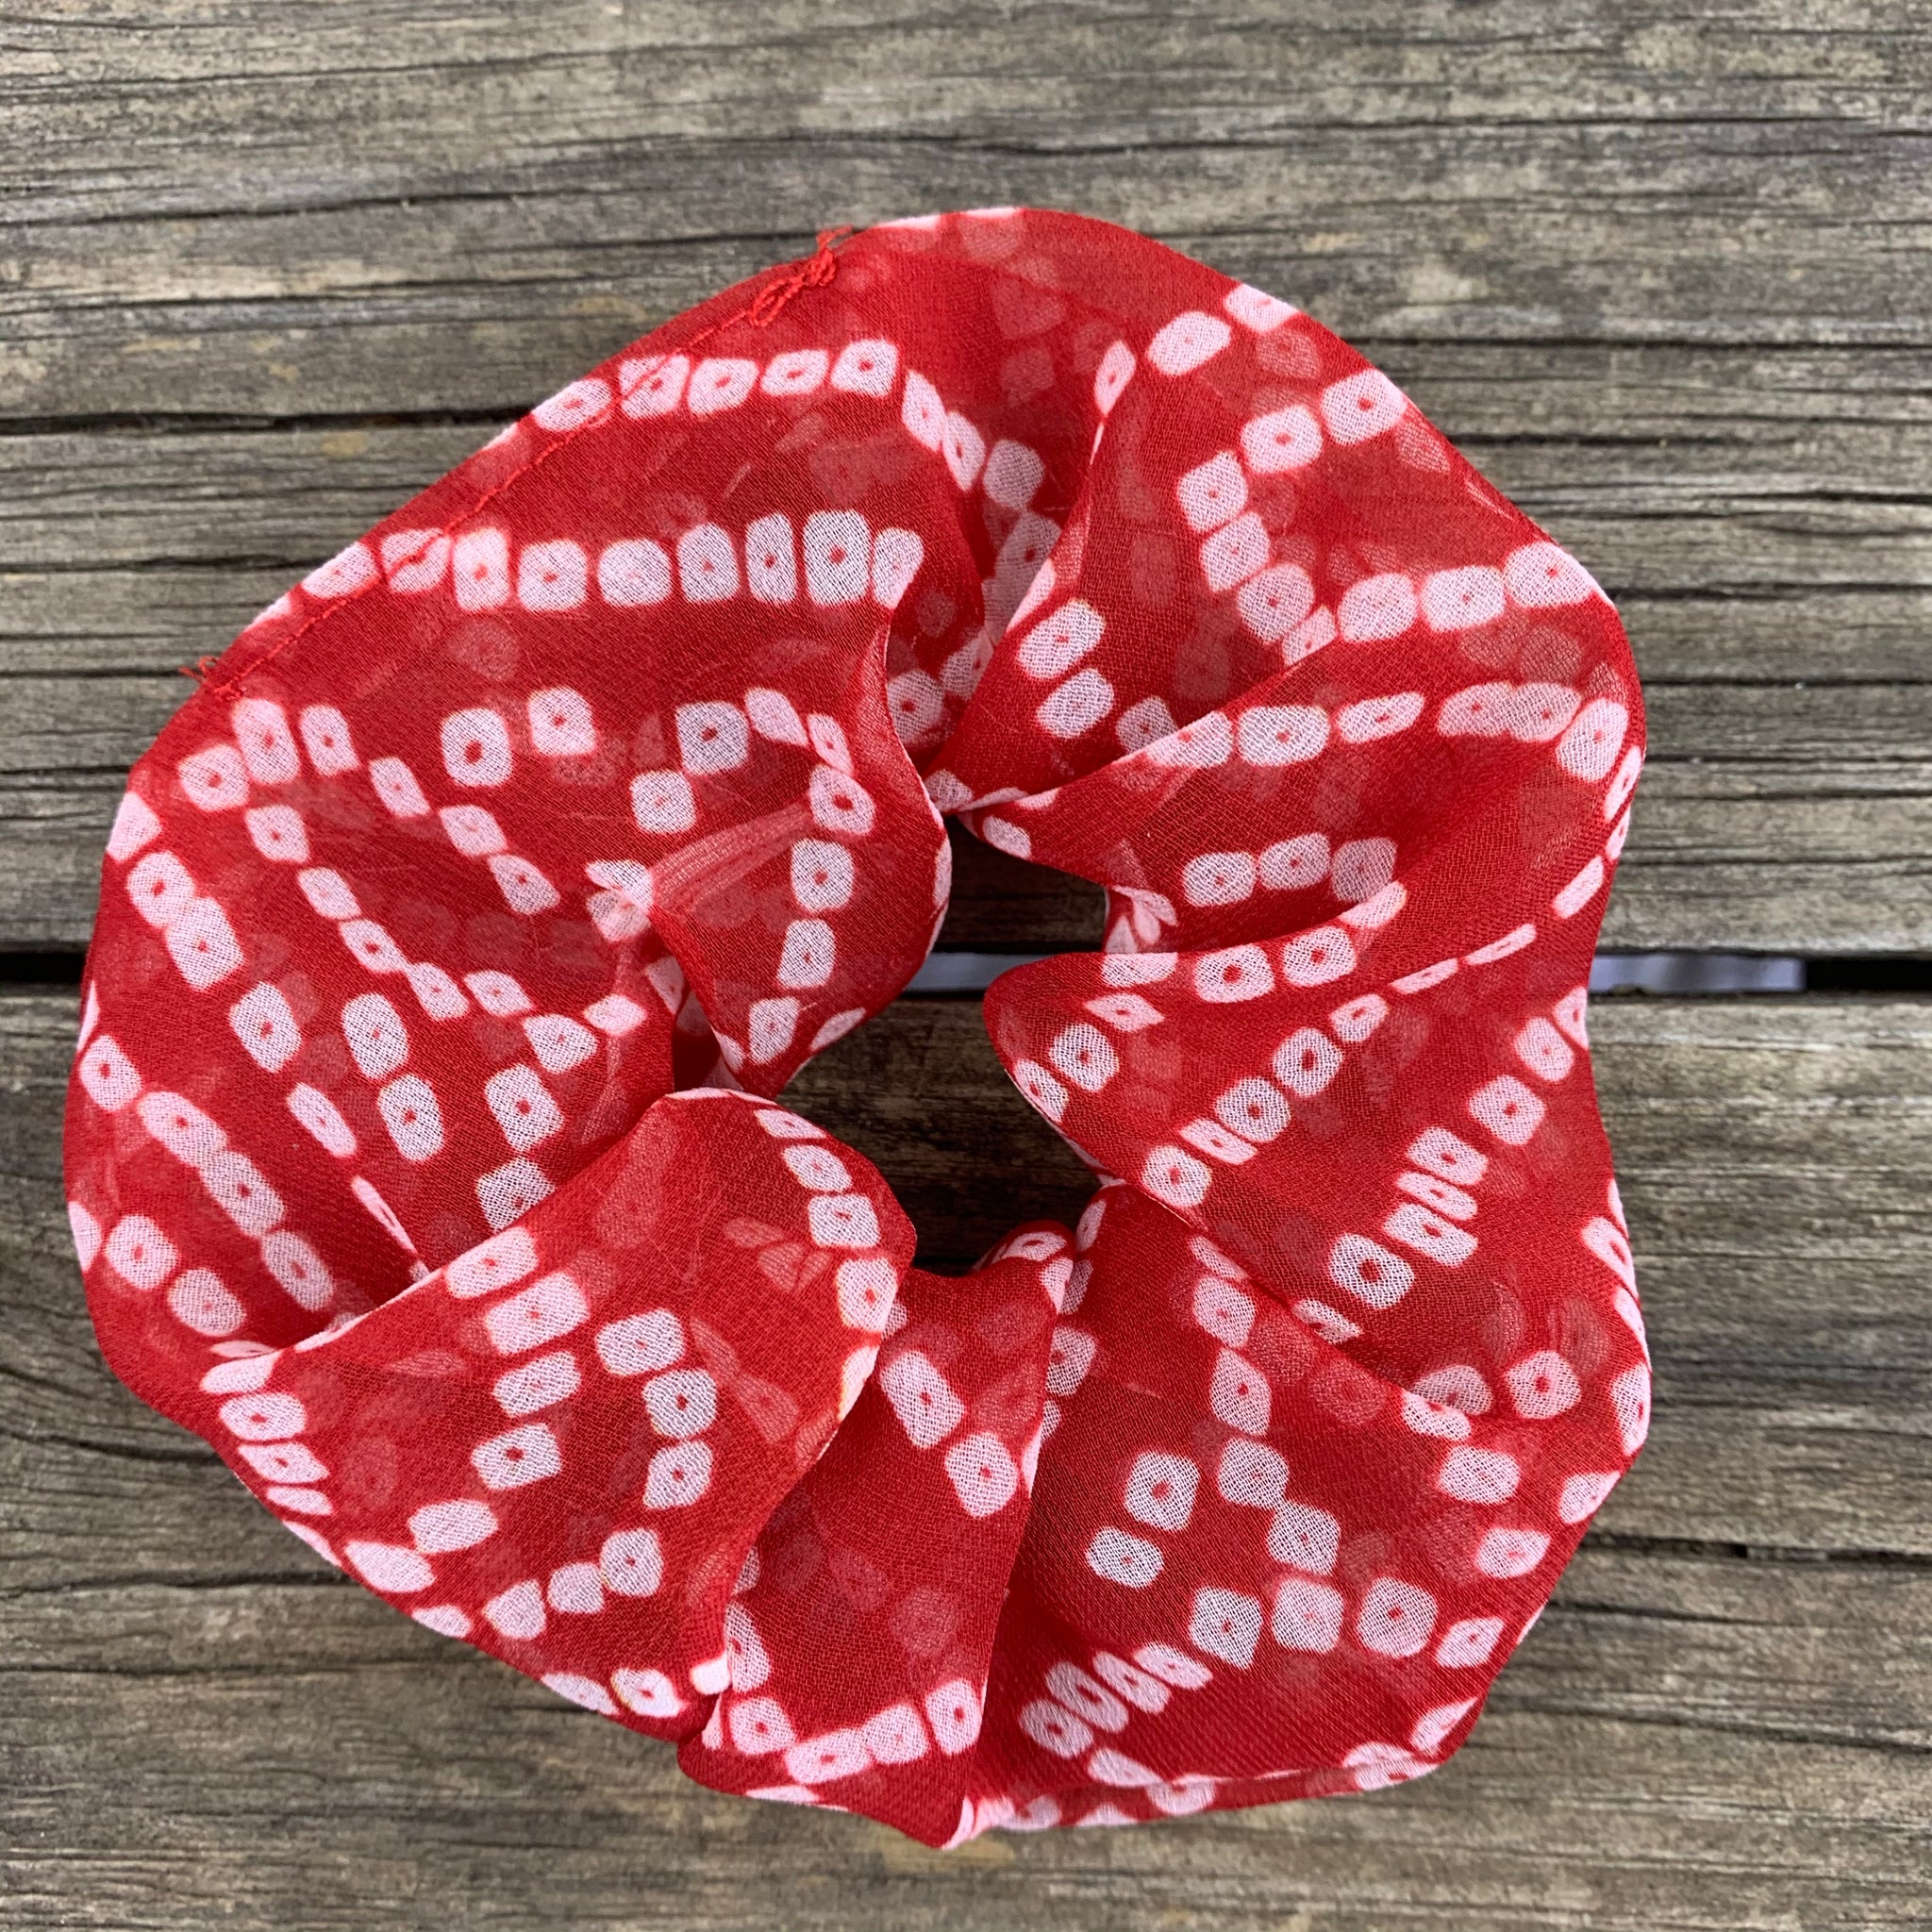 Fair Trade Ethical Upcycled Fabric Scrunchies Sheer